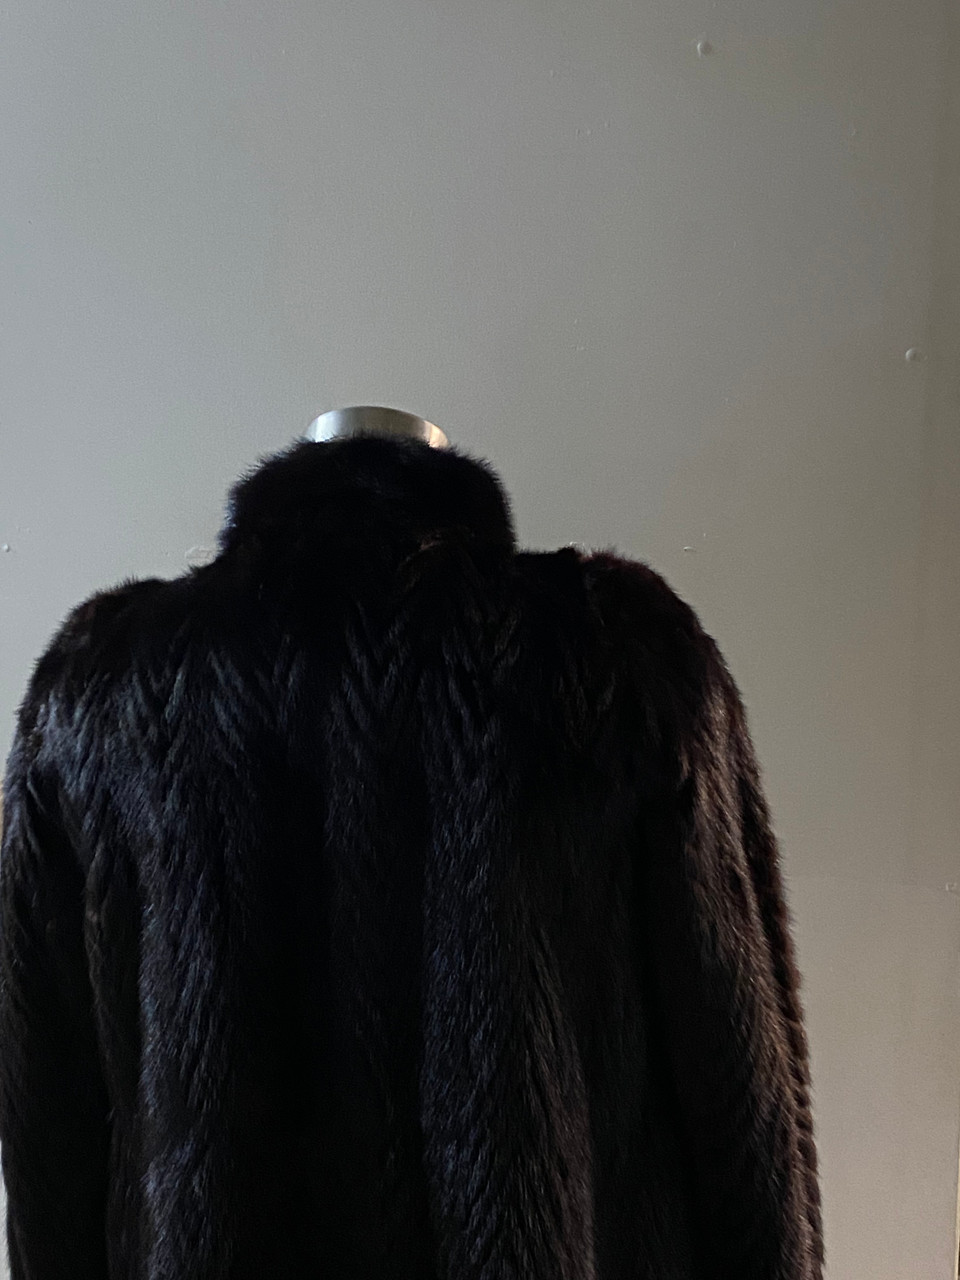 Vintage Brown Mink & Leather Fur Jacket, No monogram, Black Lining, Tie  String - furoutlet - fur coat, fur jackets, fur hats, prices subject to  change without notice, so order now!